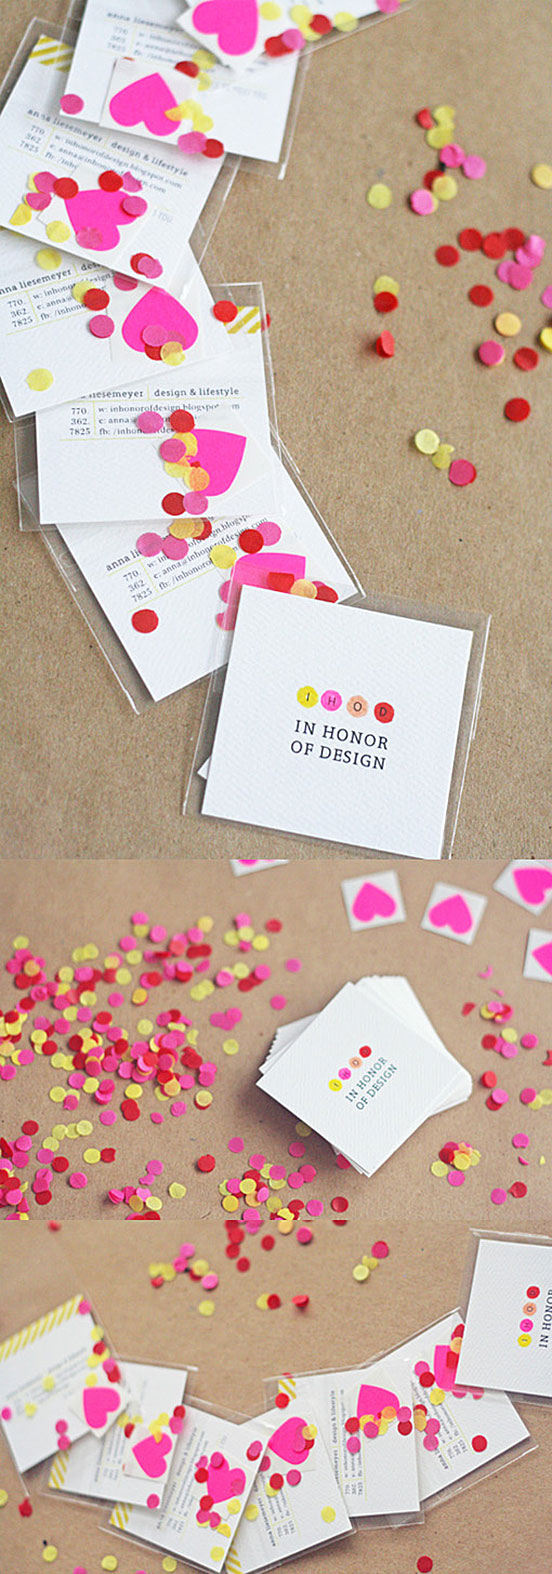 Sweet Interactive DIY Business Cards